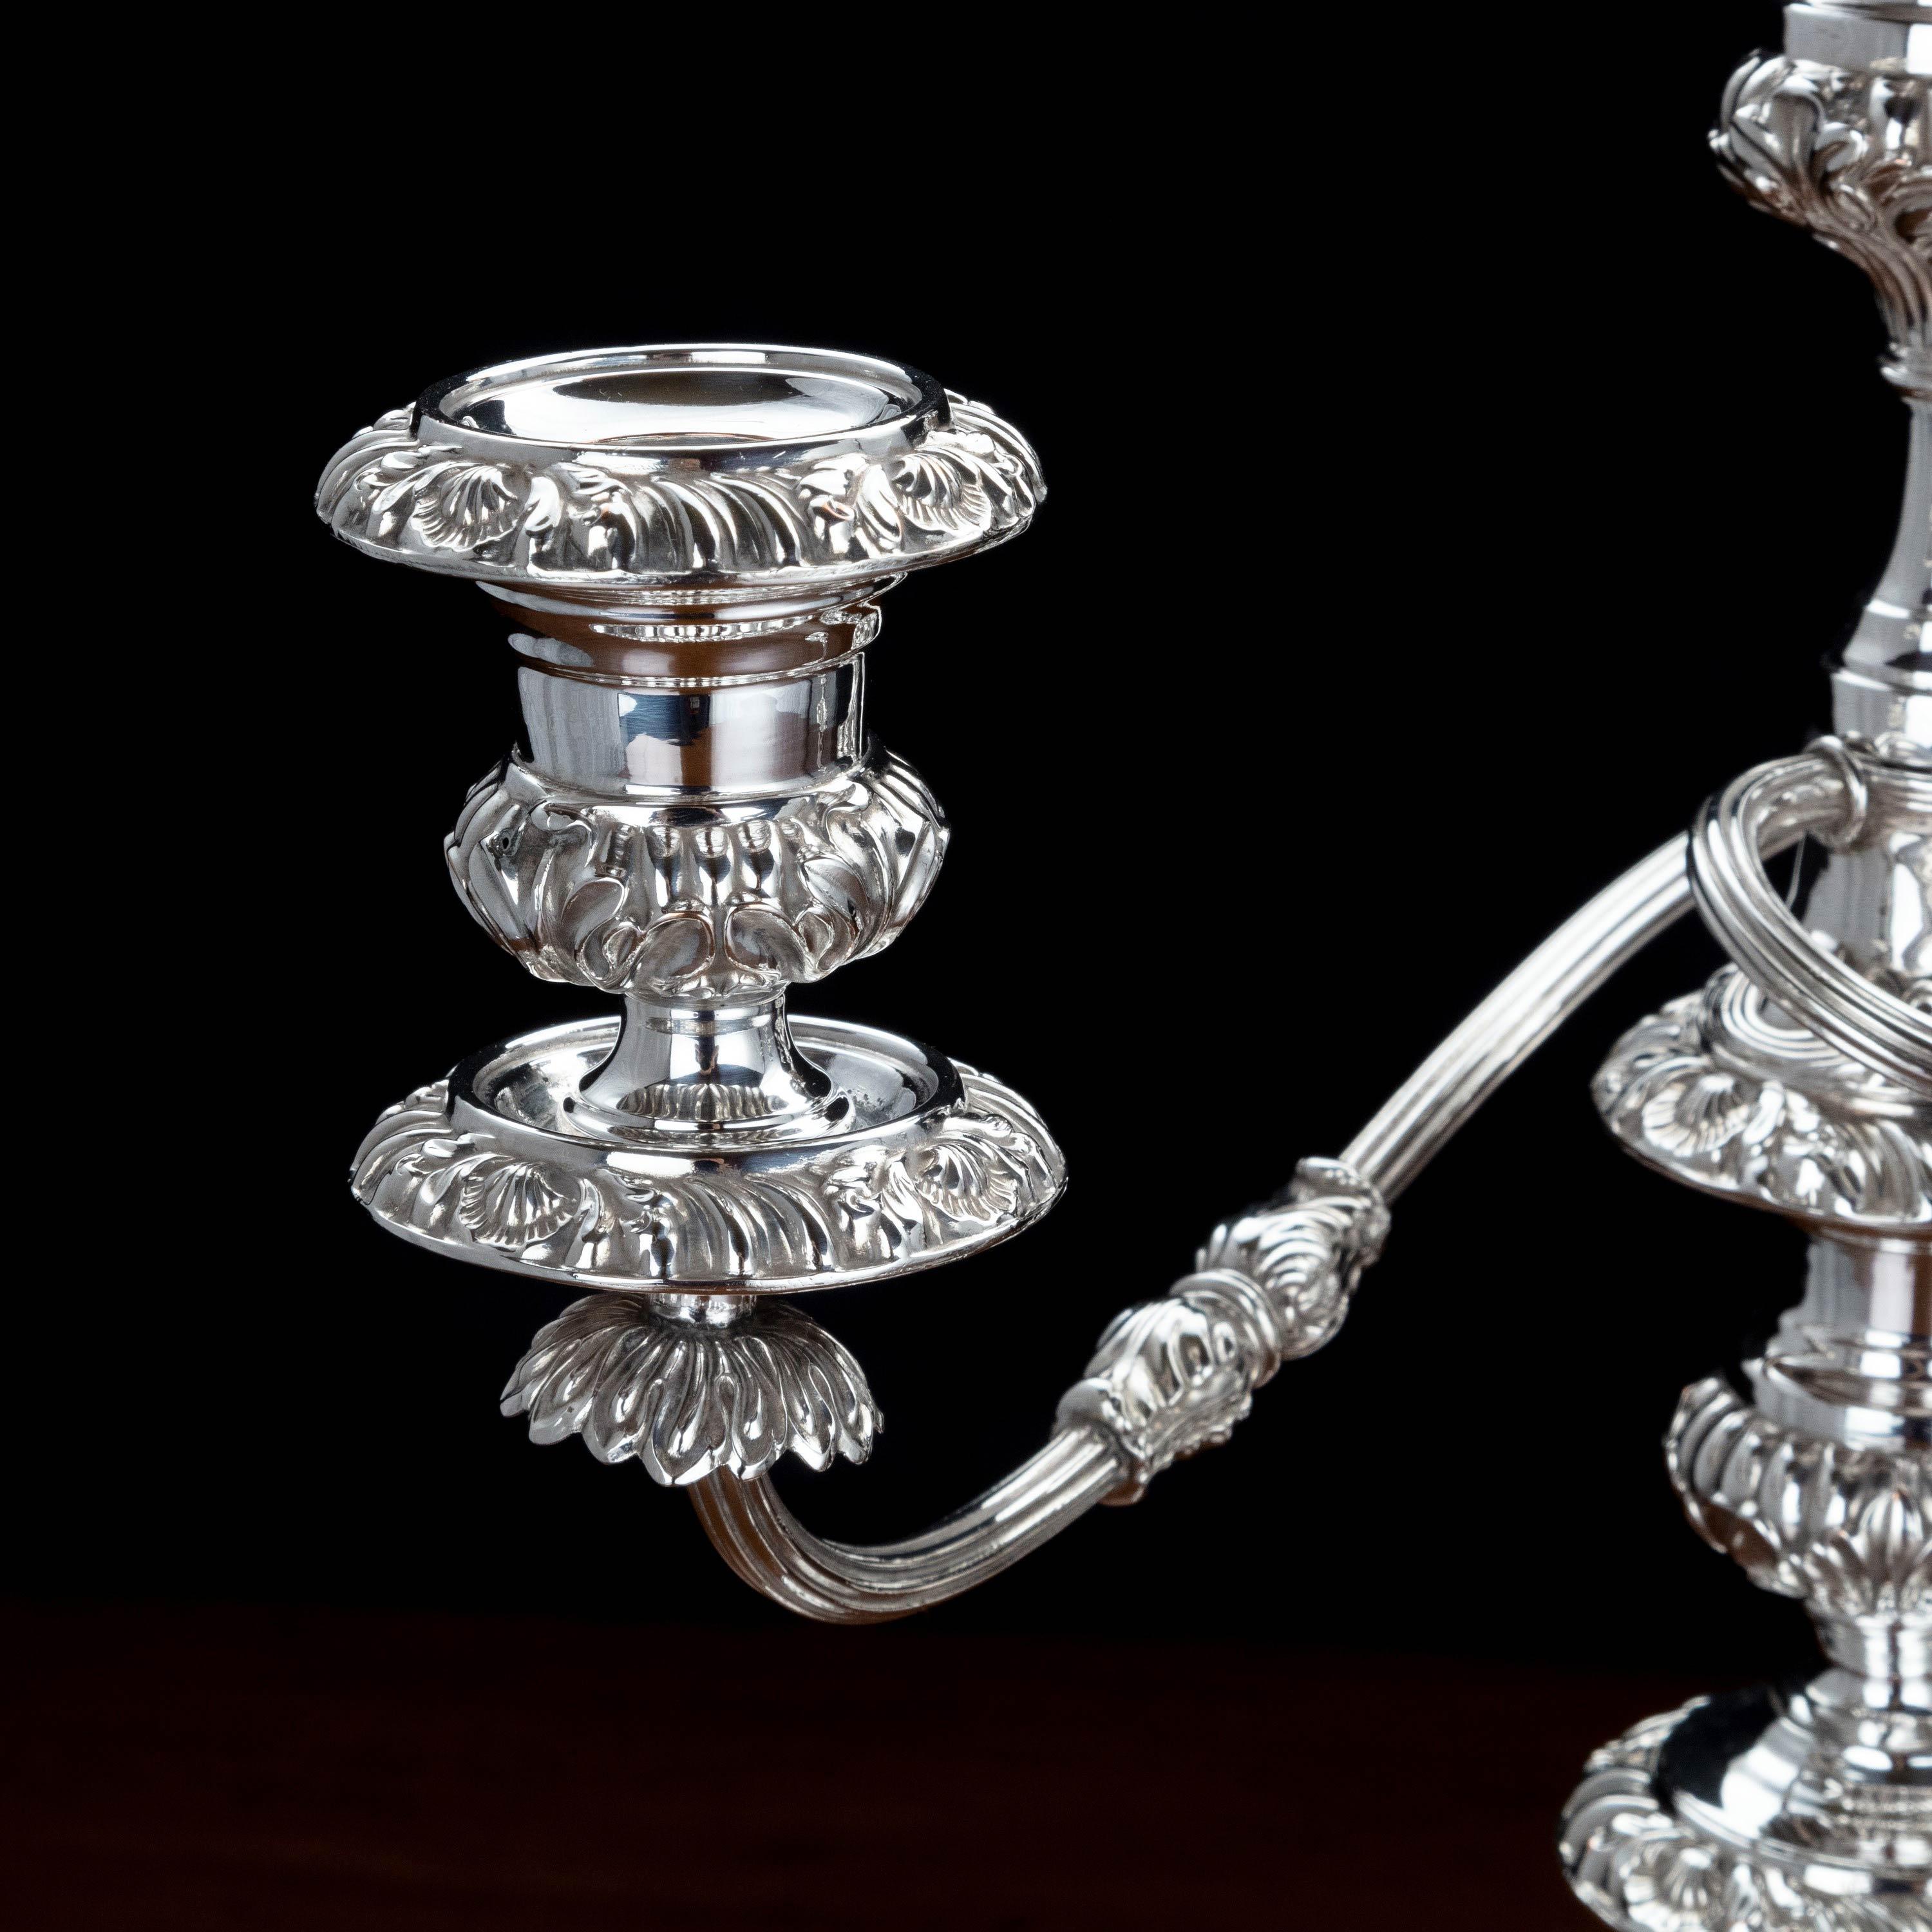 English Good Pair of 19th Century Sheffield-Plated Candelabra